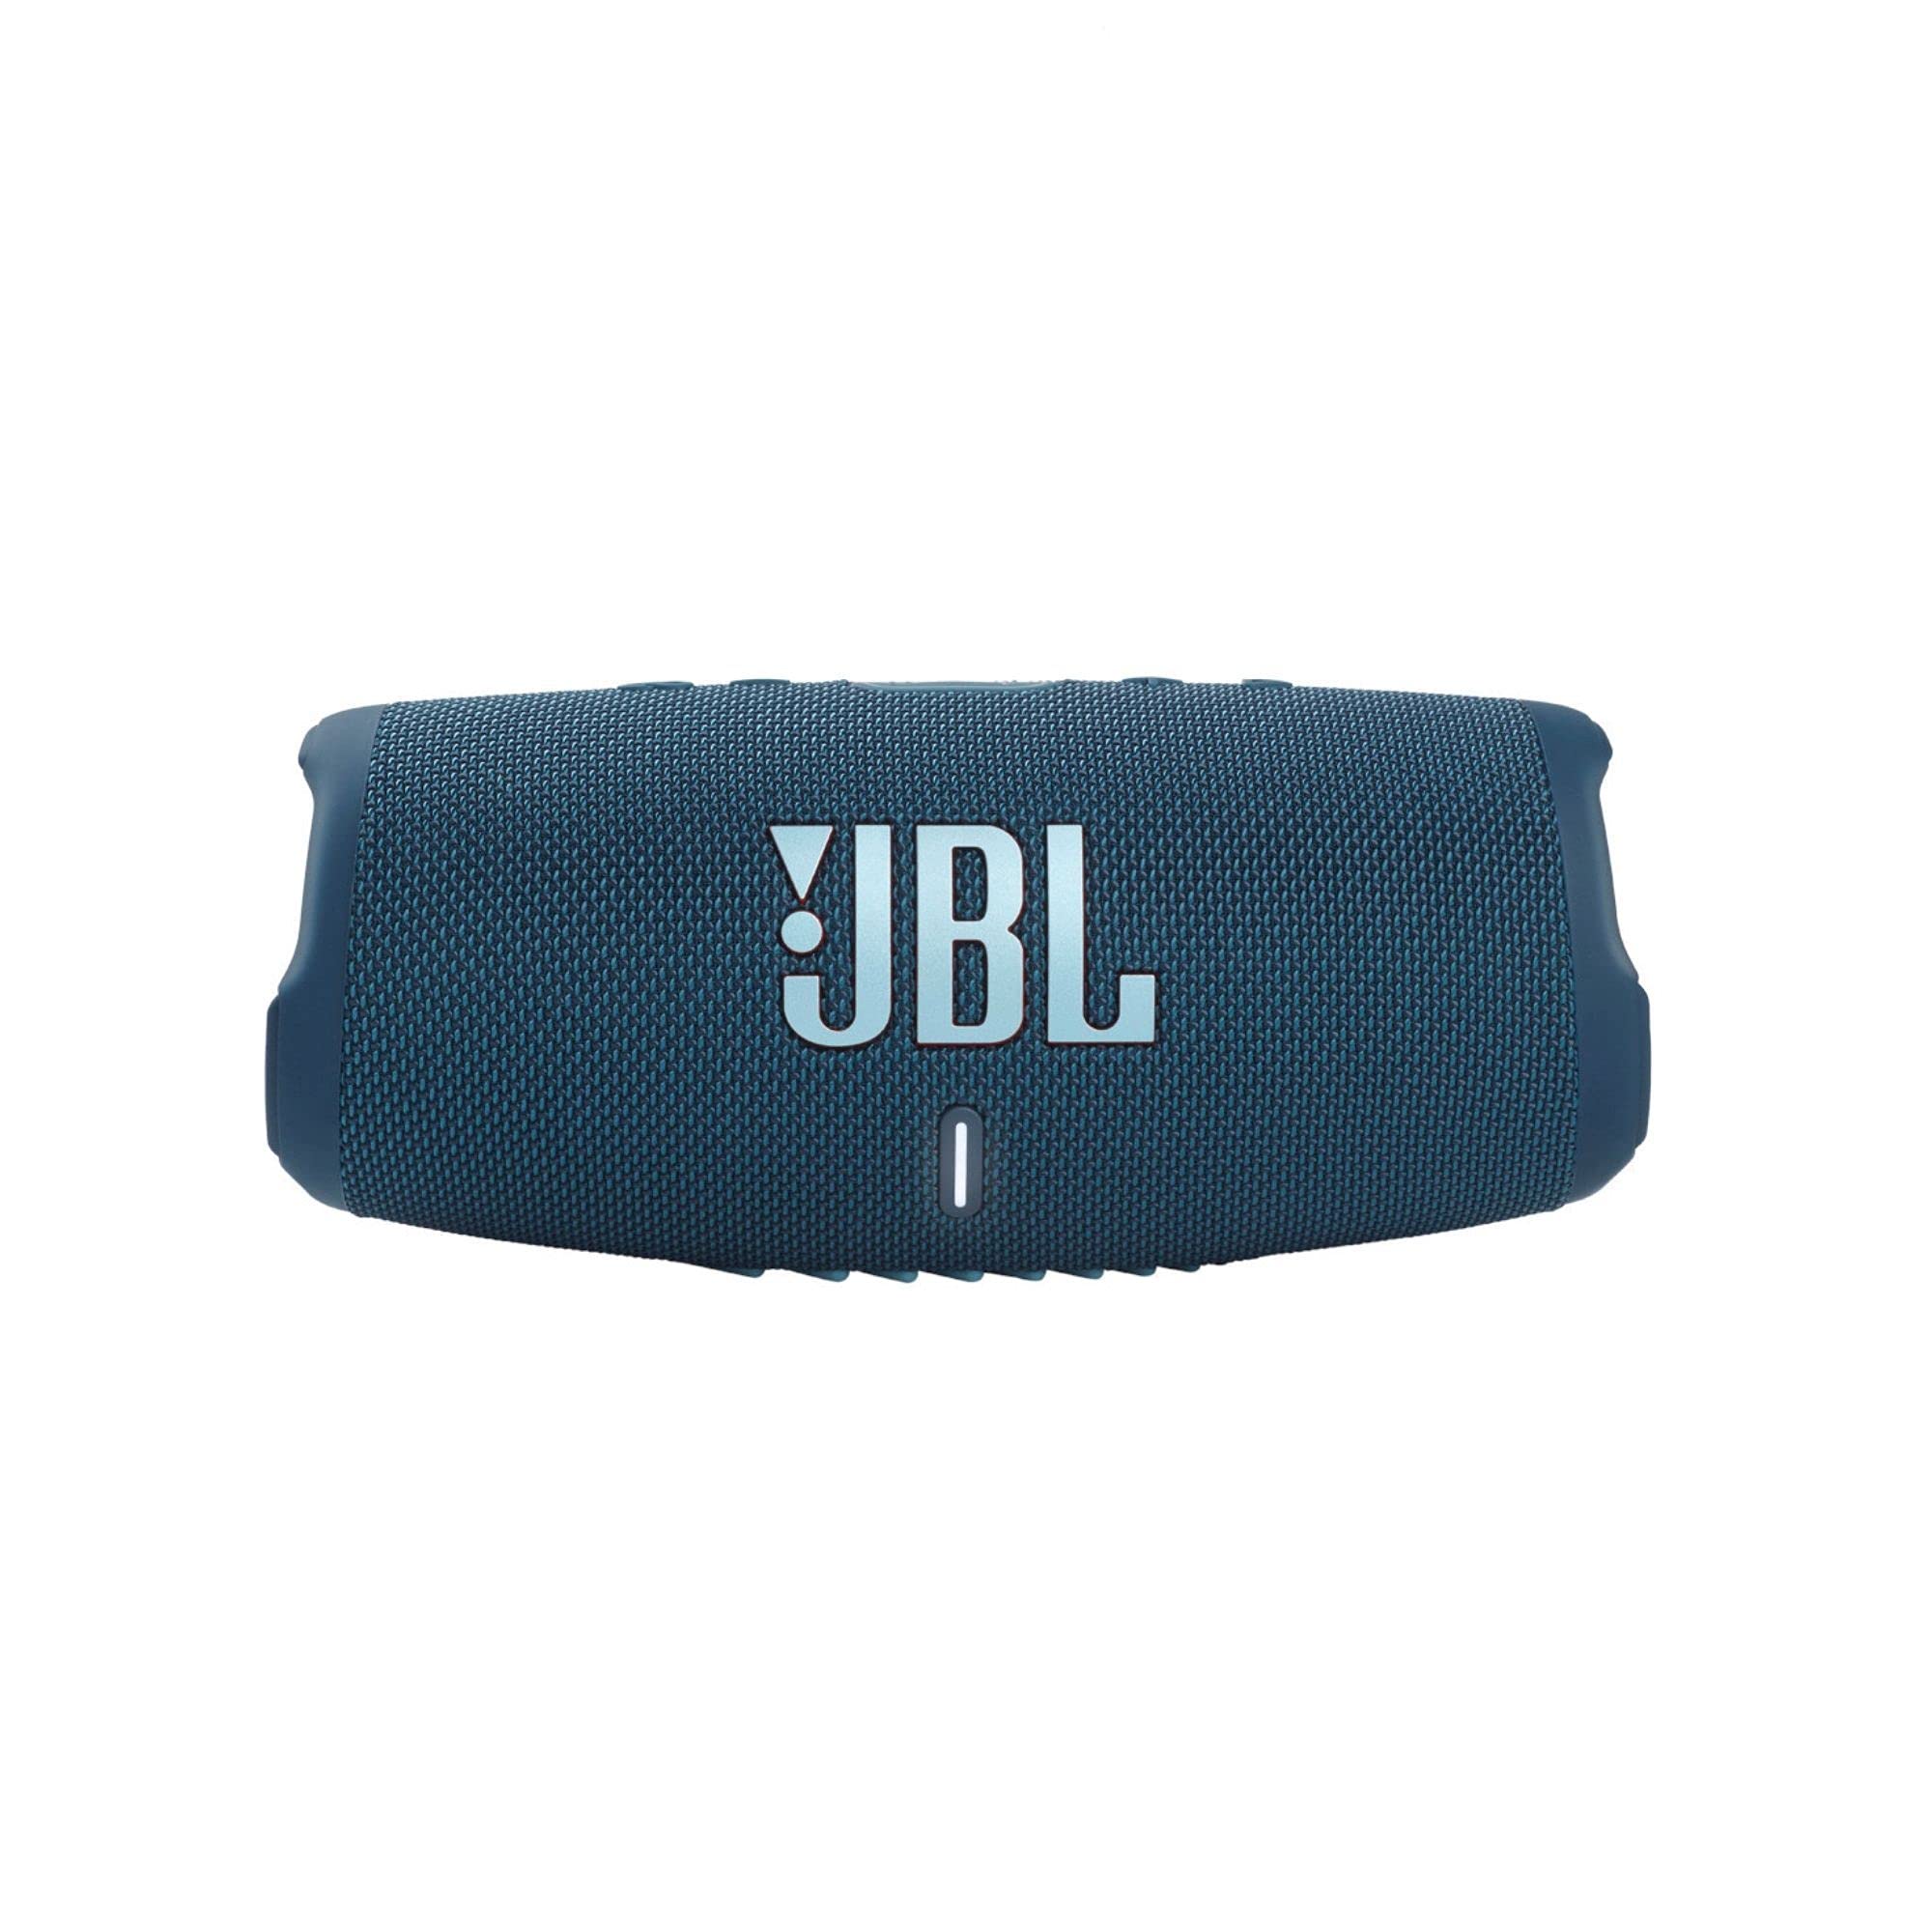 JBL Charge 5 - Portable Bluetooth Speaker with IP67 Waterproof and USB Charge Out - Blue (Renewed)